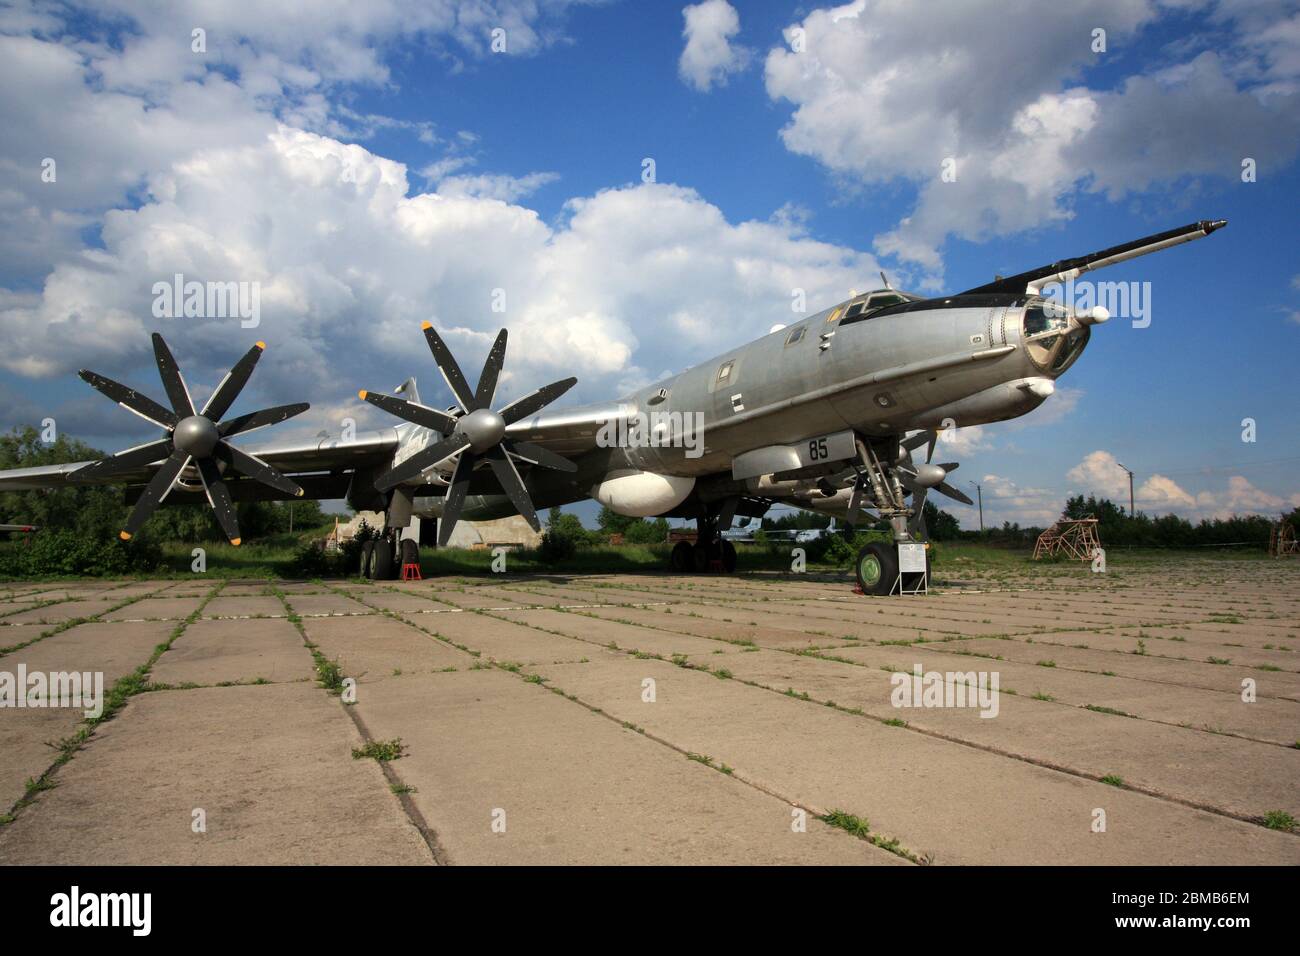 Exterior view of a Tupolev Tu-142 'Bear' maritime reconnaissance and anti-submarine warfare aircraft at the Zhulyany State Aviation Museum of Ukraine Stock Photo